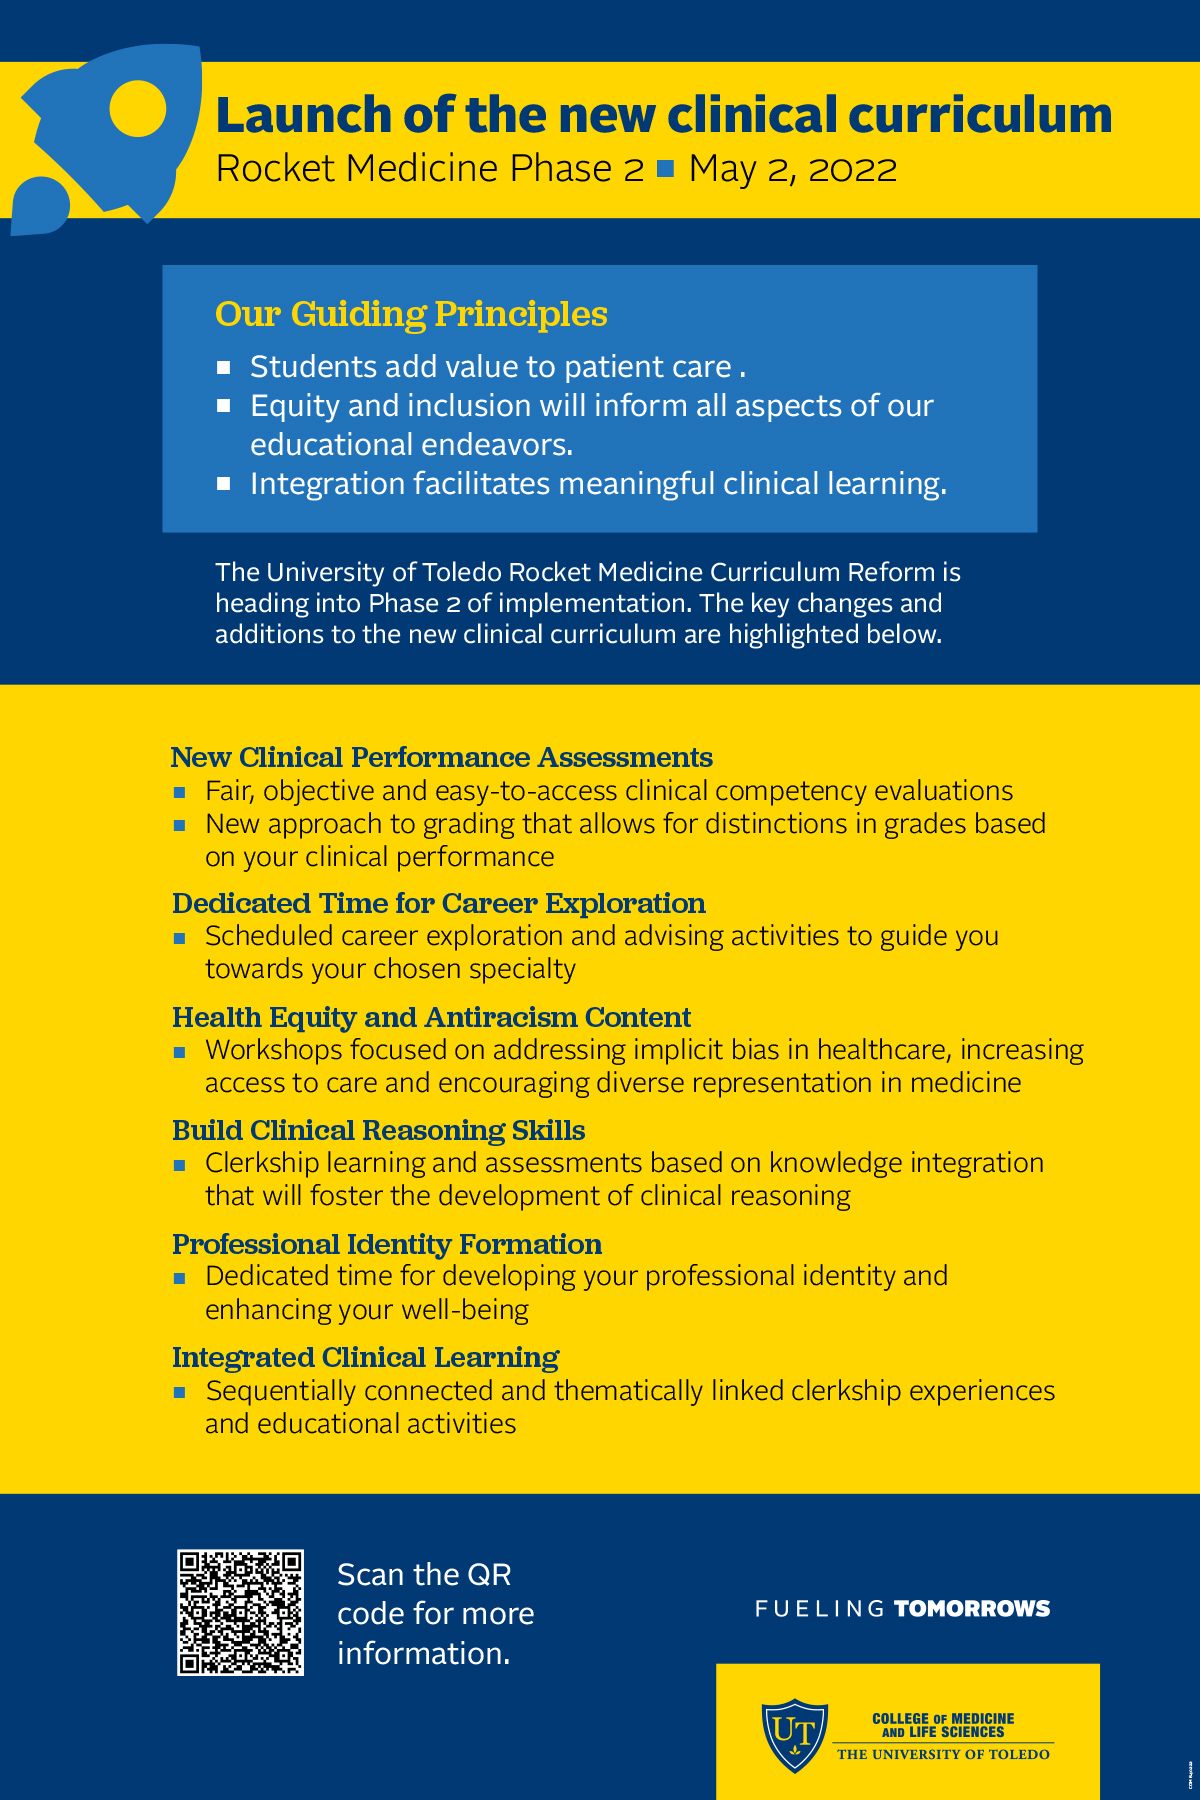 Poster for the launch of the new clinical curriculum